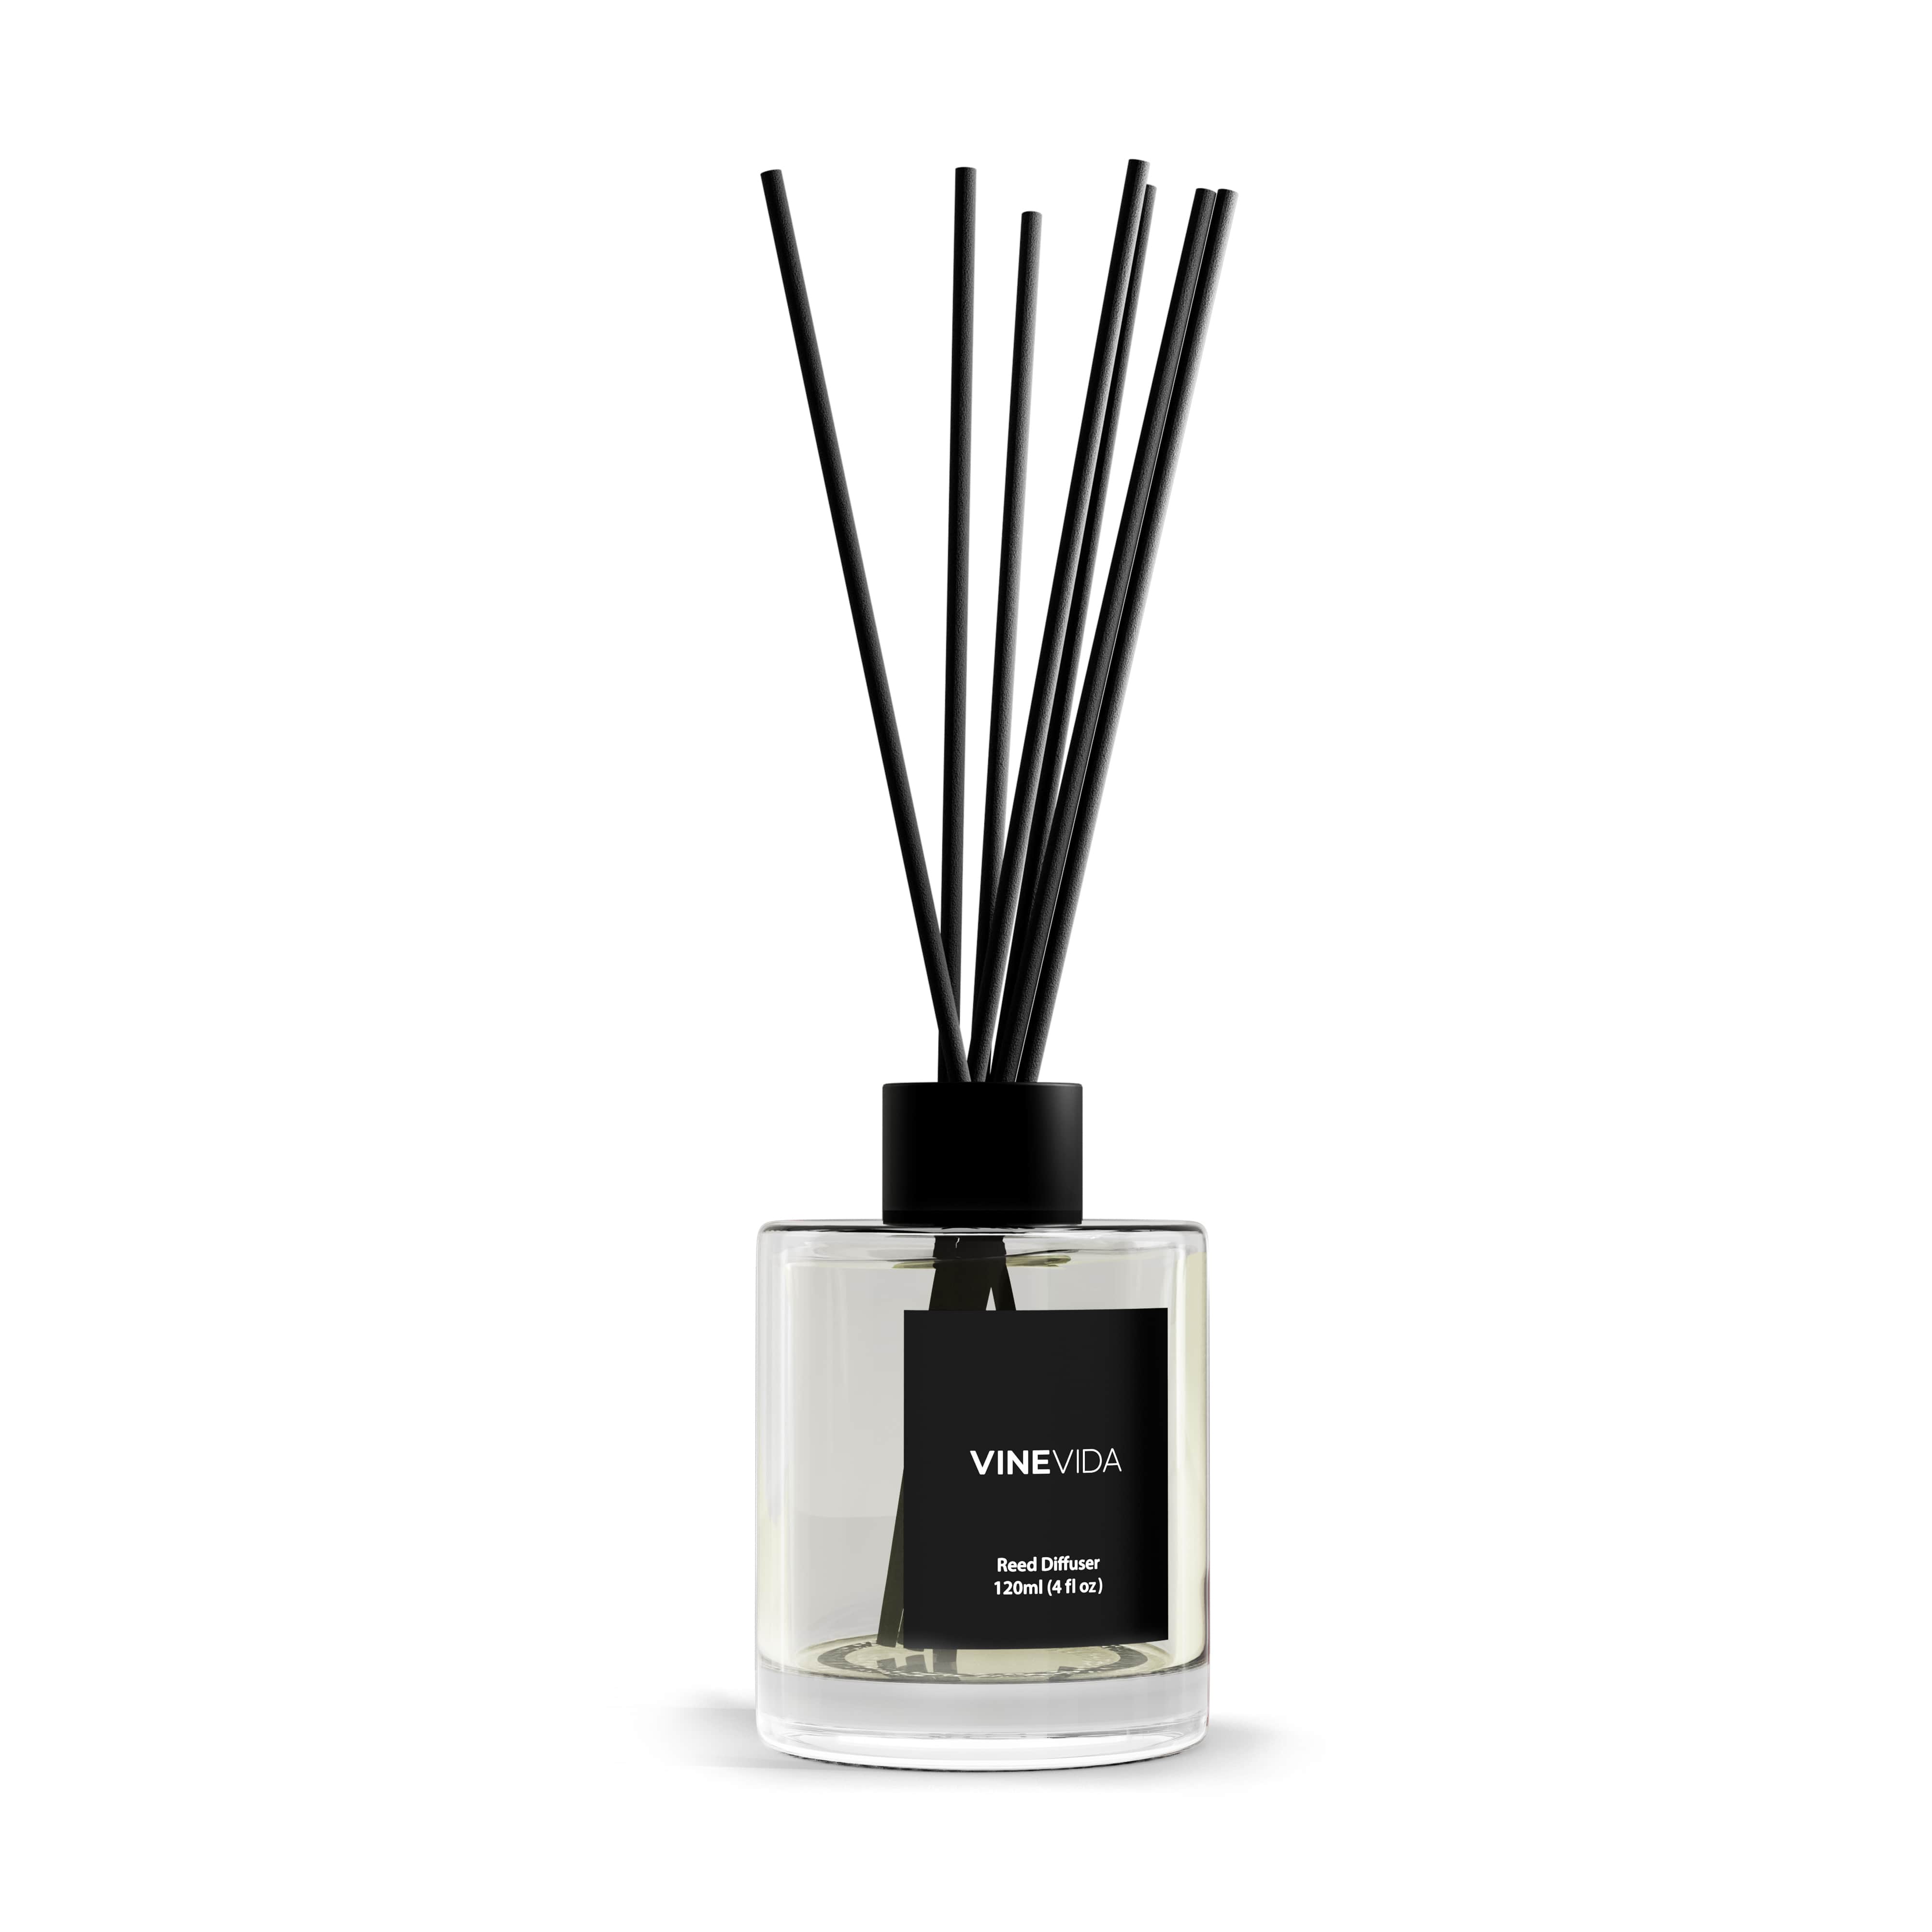 NO. 1201 Reed Diffuser - Inspired by: Baies by Diptyque